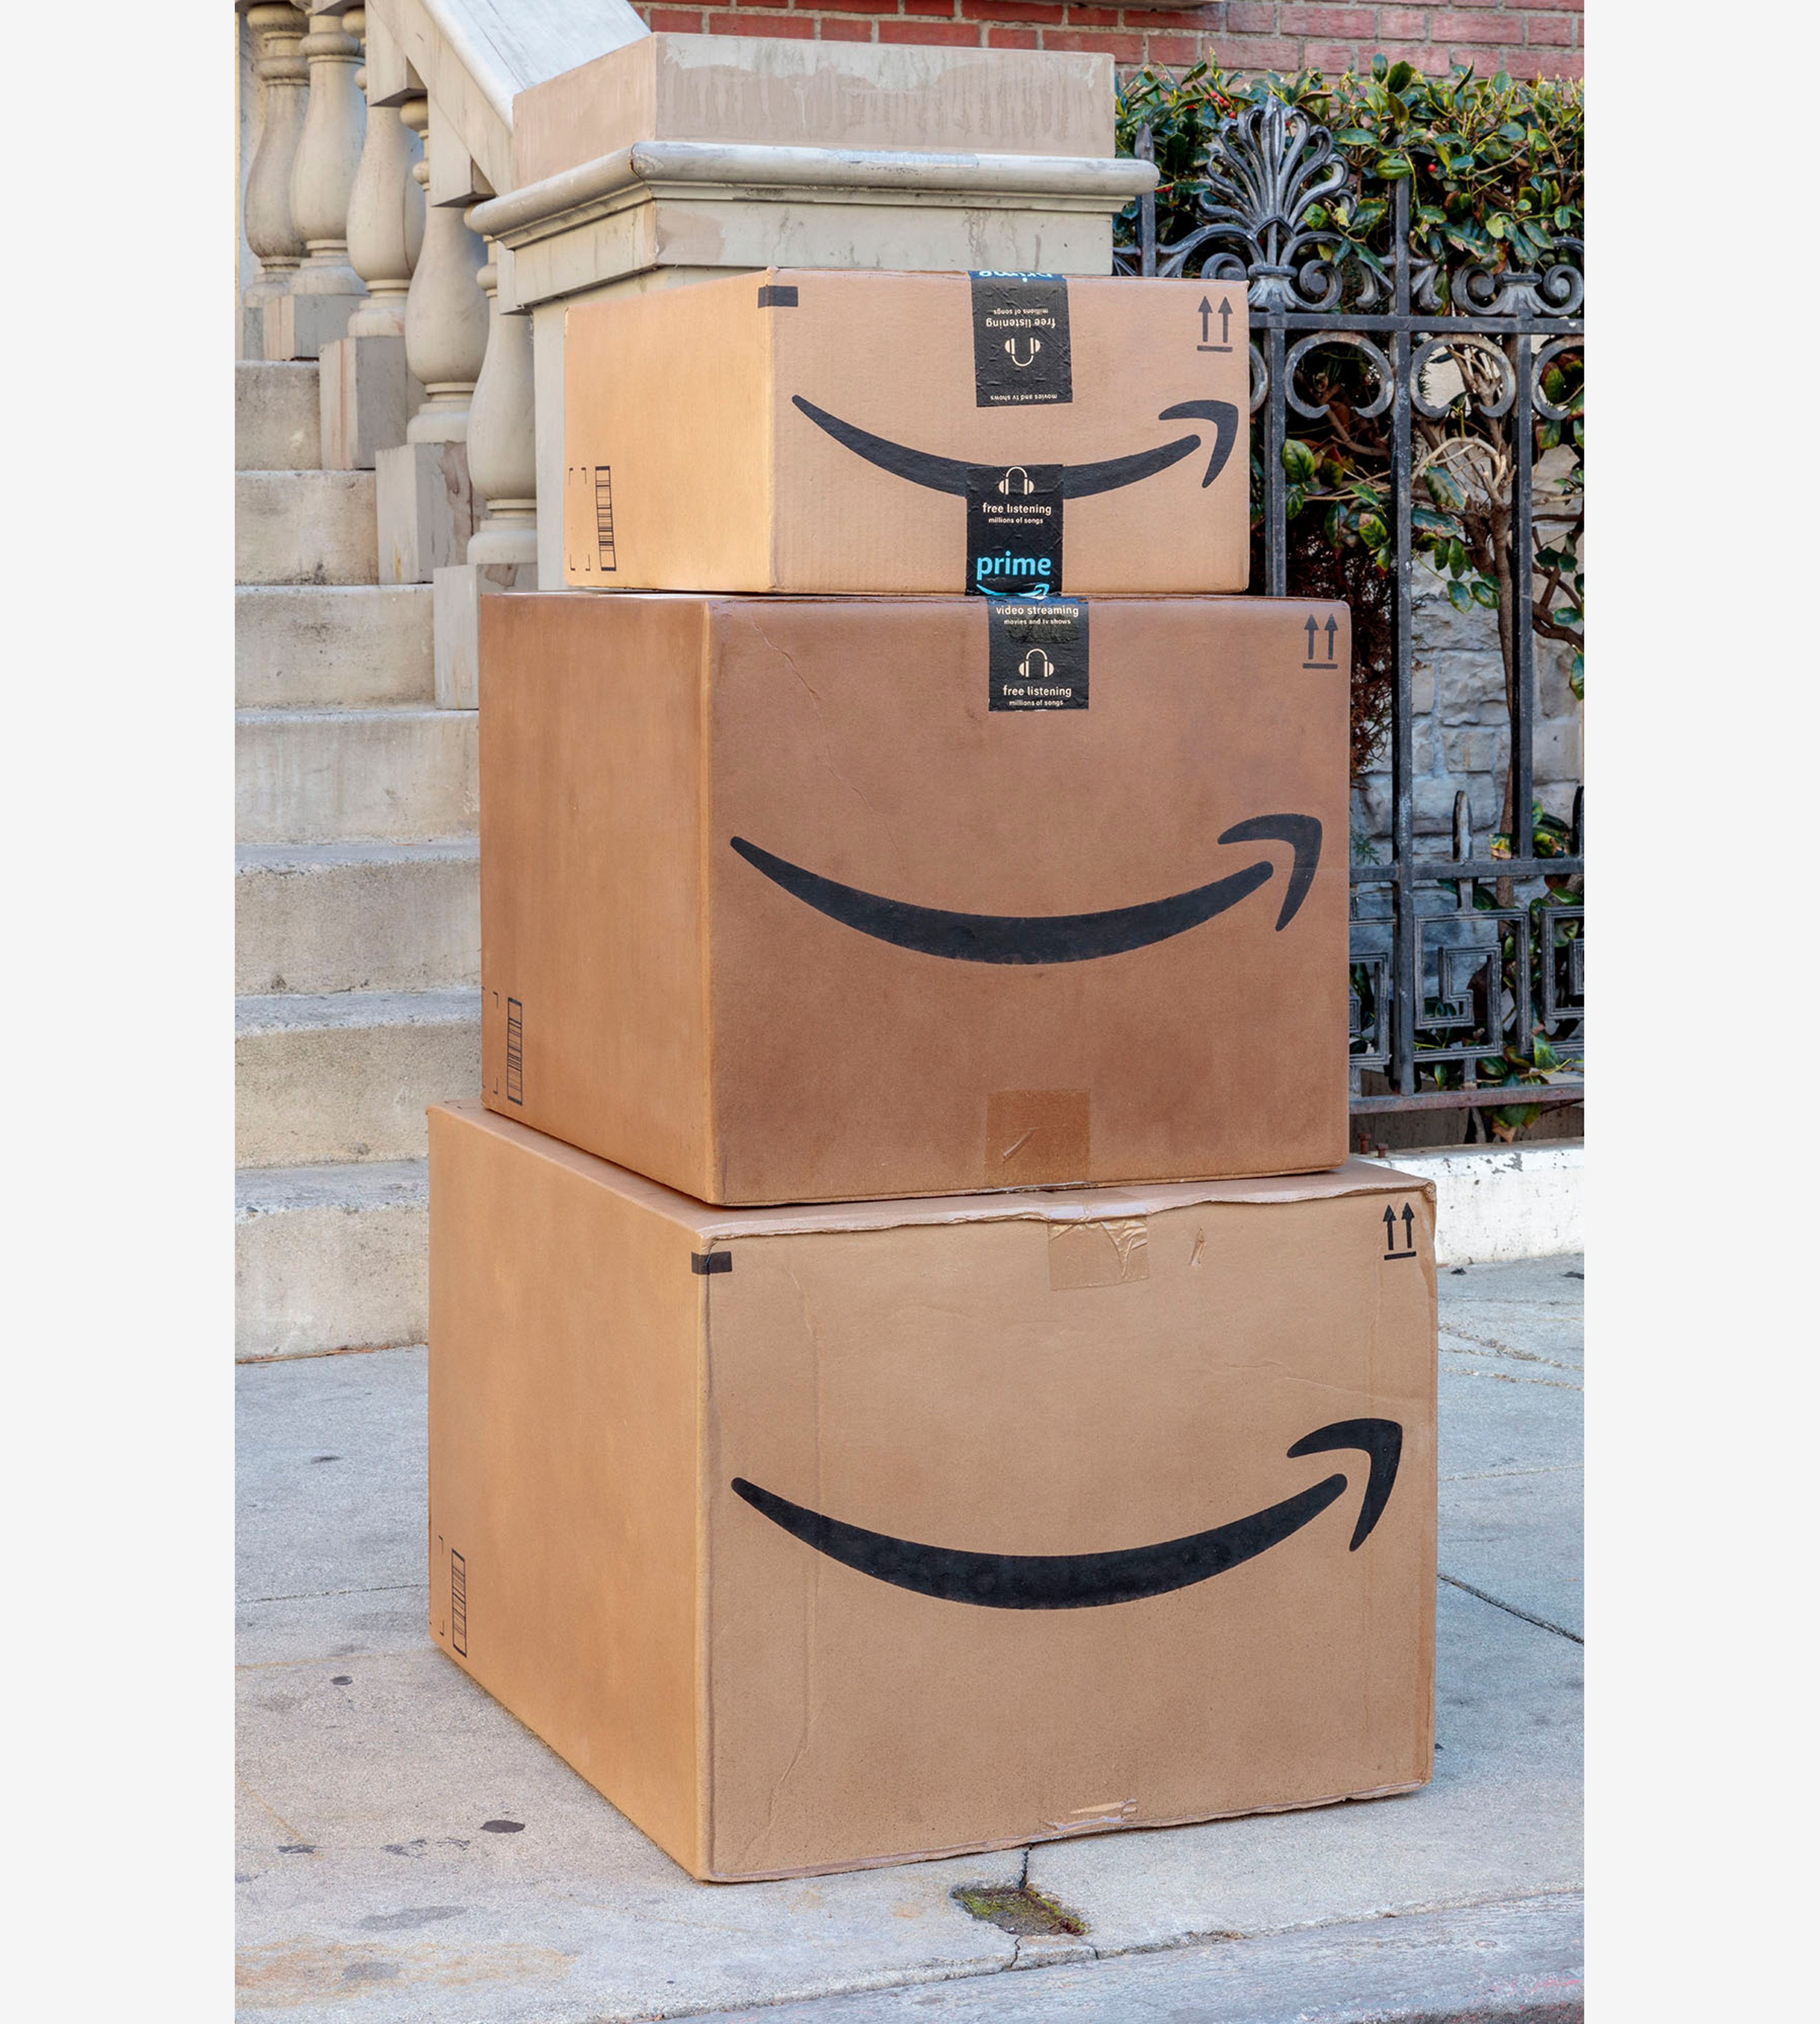 Amazon boxes standing on top of each other